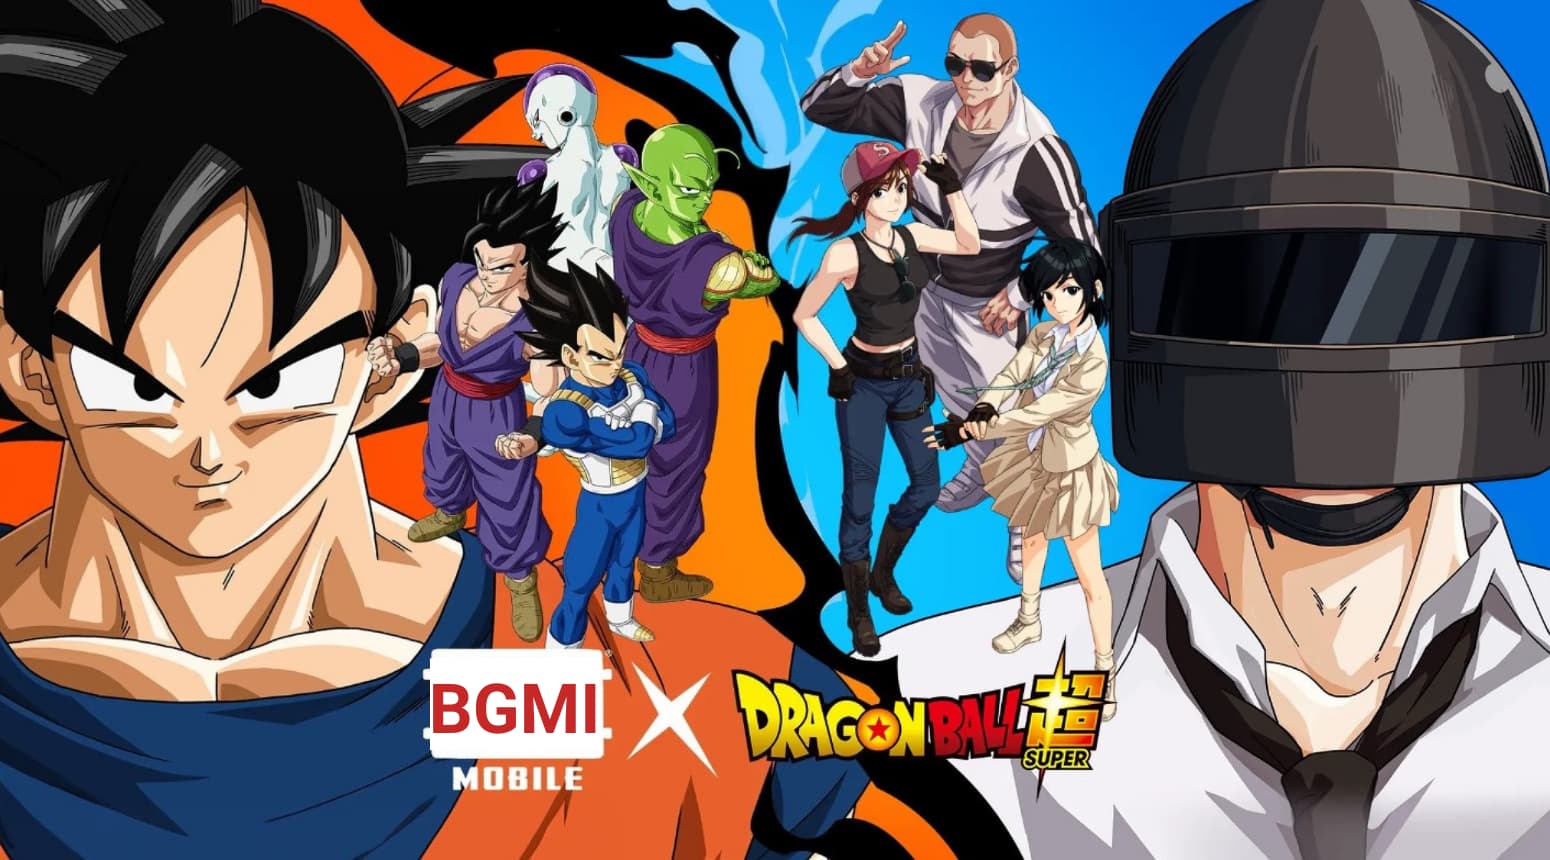 BGMI 2.7 update APK download link for Android devices